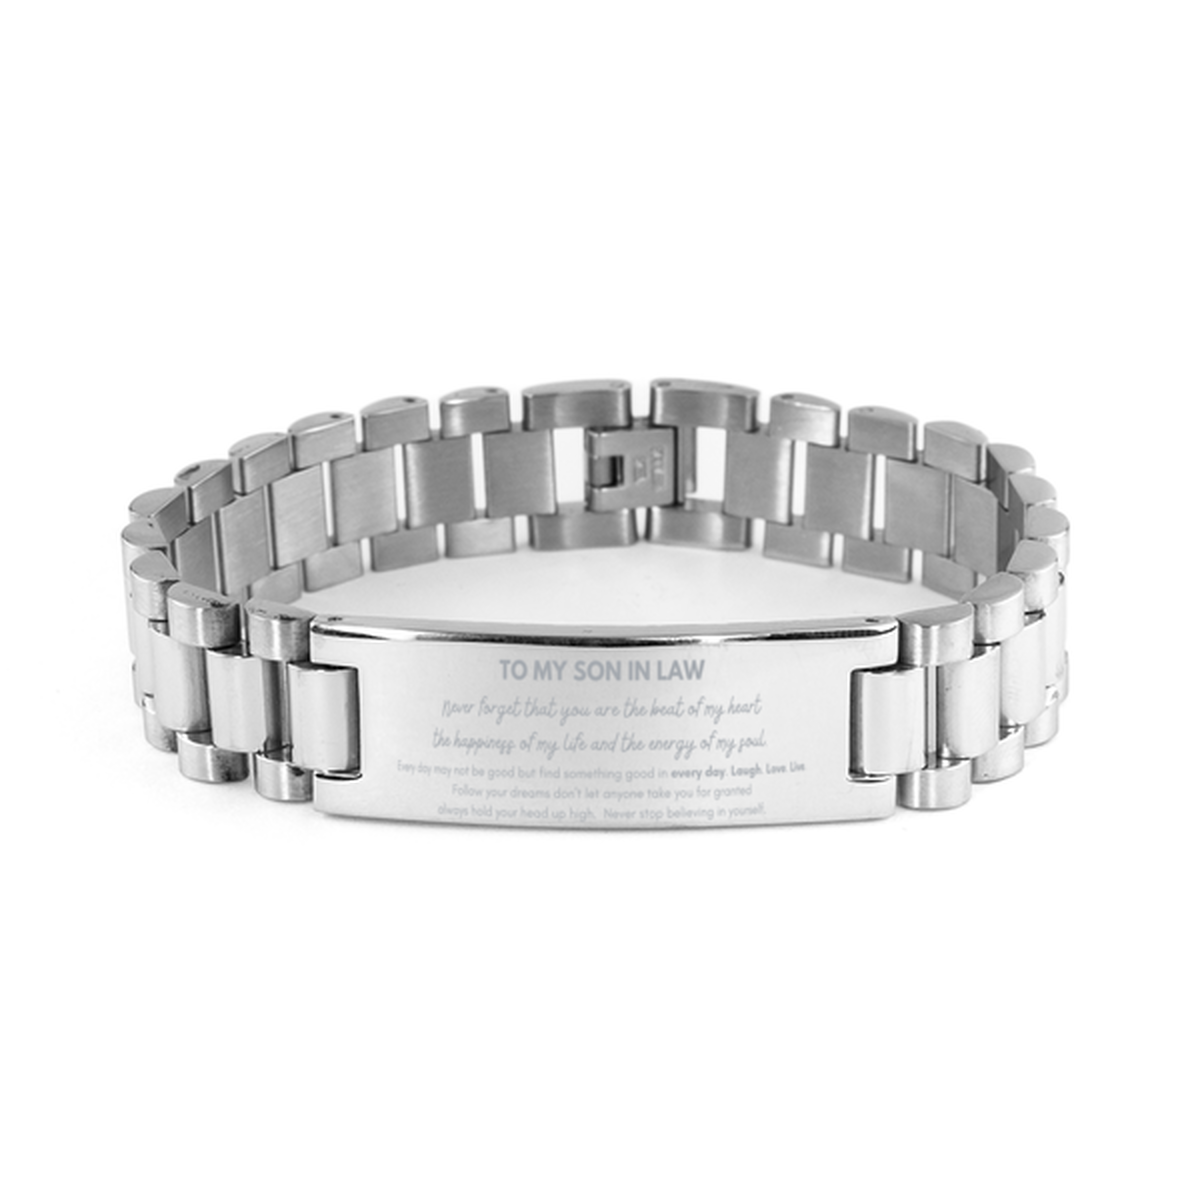 To My Son In Law Bracelet Gifts, Christmas Son In Law Ladder Stainless Steel Bracelet Present, Birthday Unique Motivational For Son In Law, To My Son In Law Never forget that you are the beat of my heart the happiness of my life and the energy of my soul